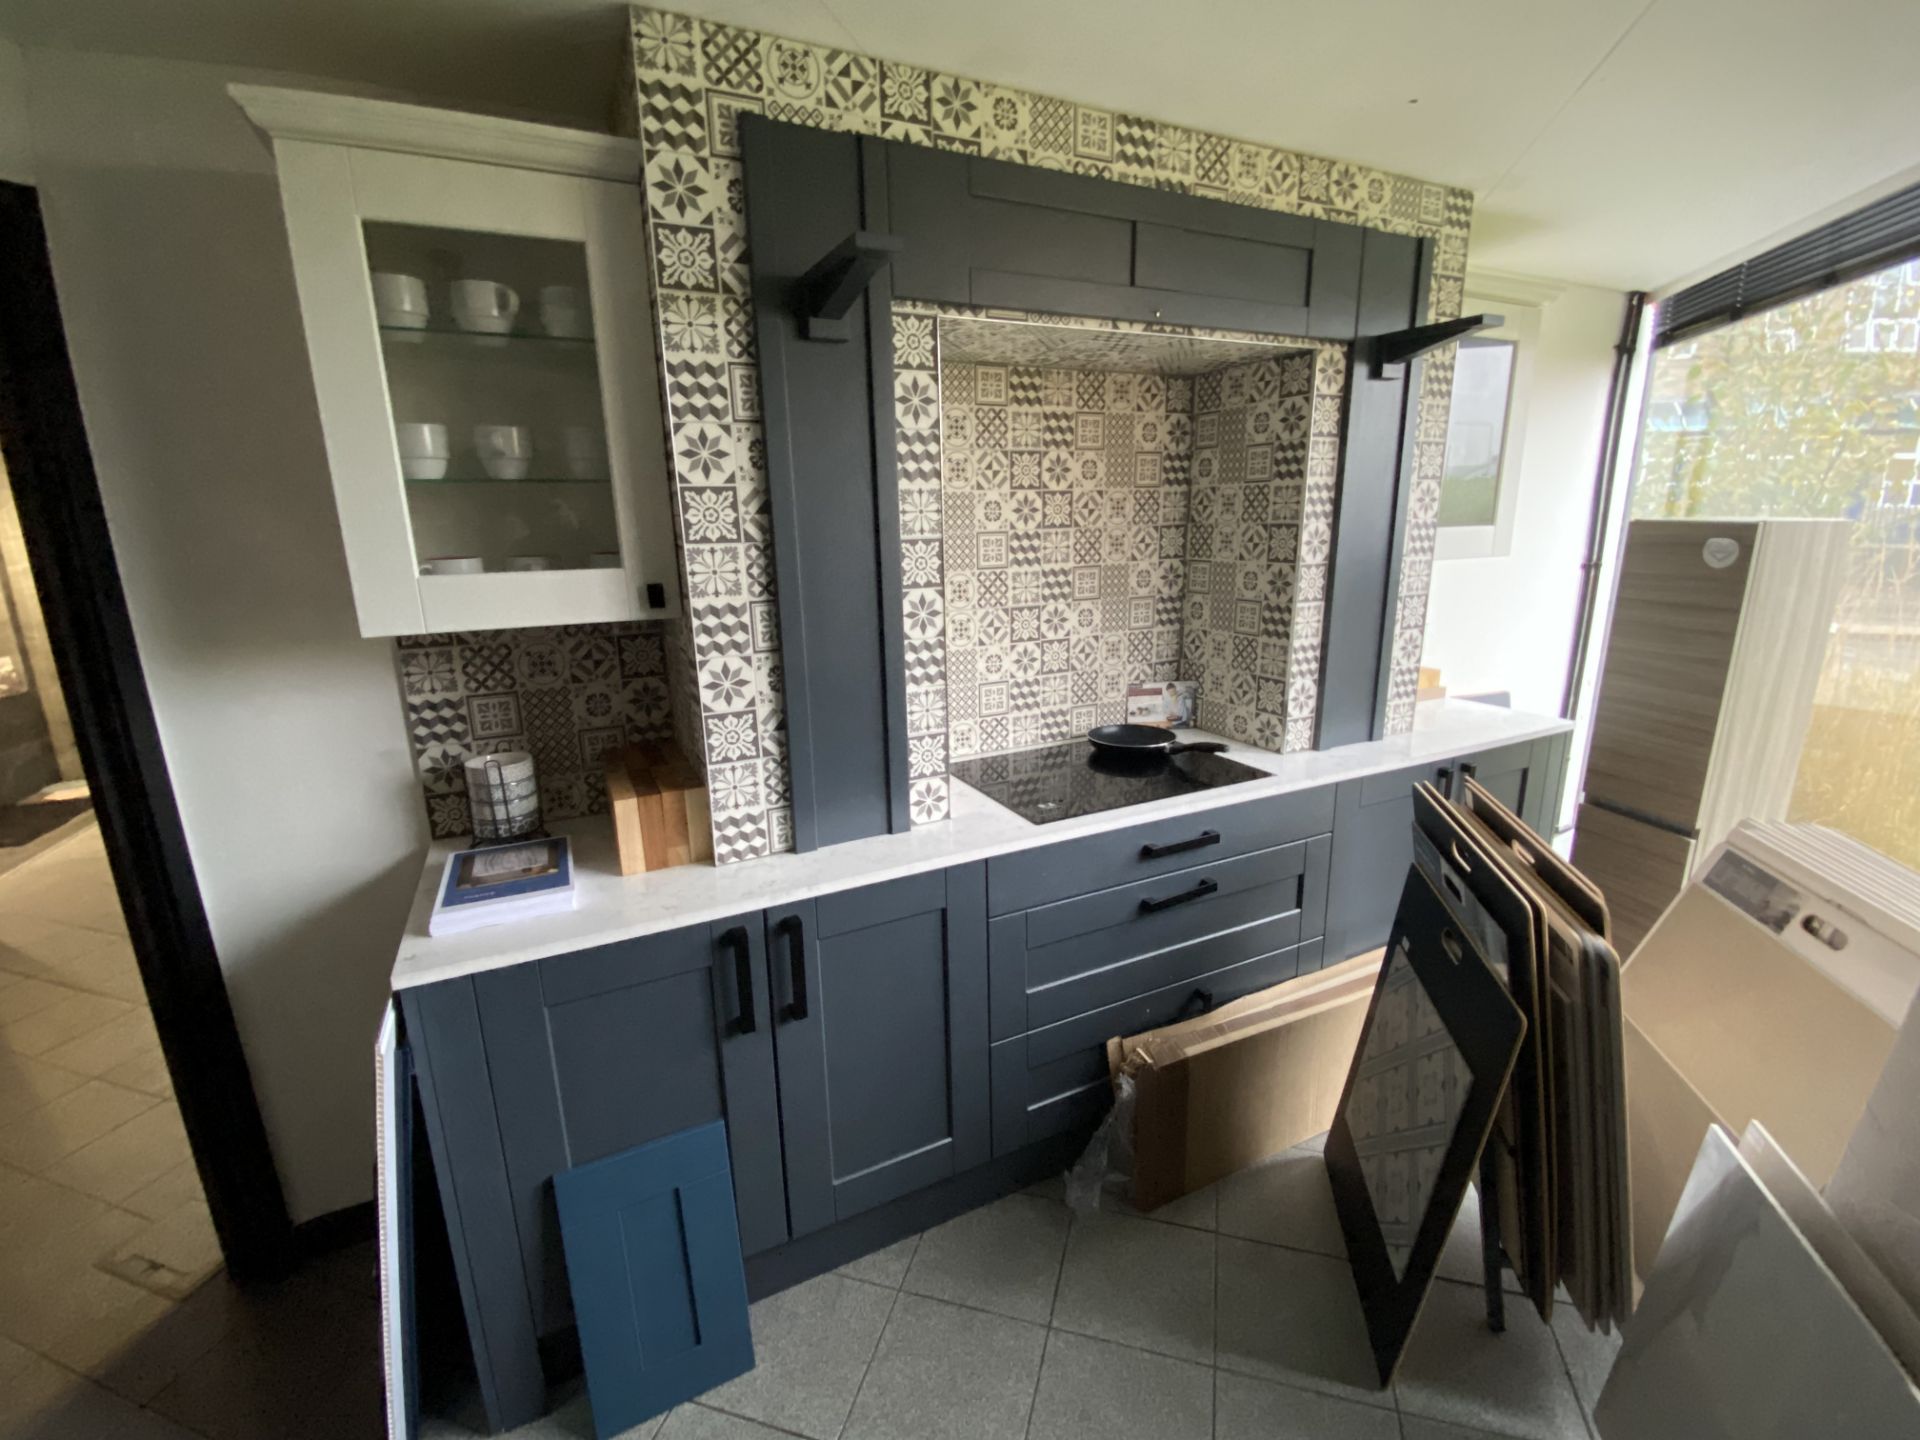 Corner kitchen units in blue/gray and white, with wall mounted plate rack and cupboards, sink, workt - Image 2 of 2